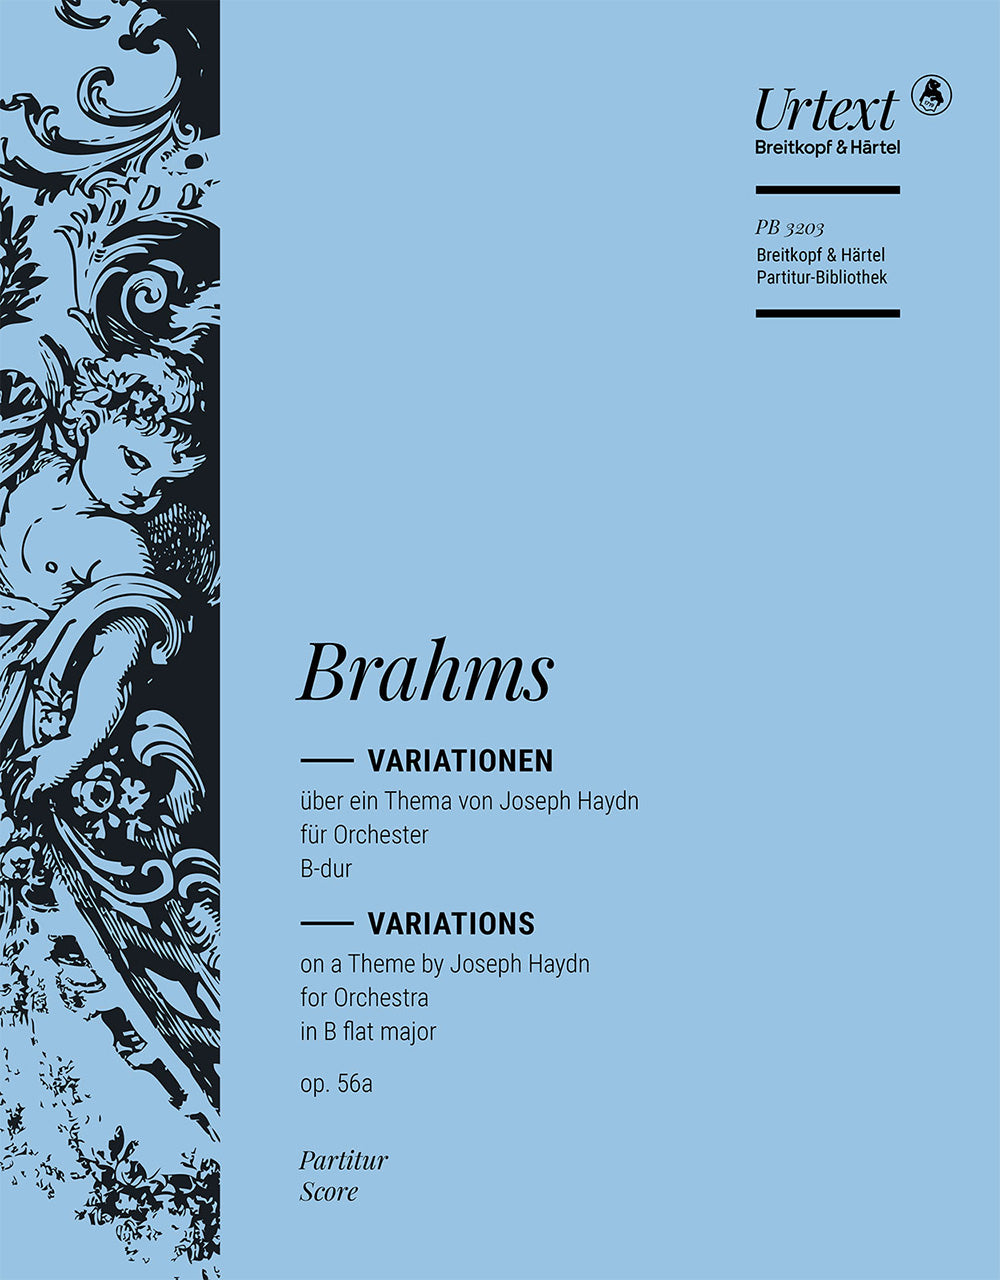 Brahms Variations on a Theme by Joseph Haydn in Bb major Op. 56a Full Score